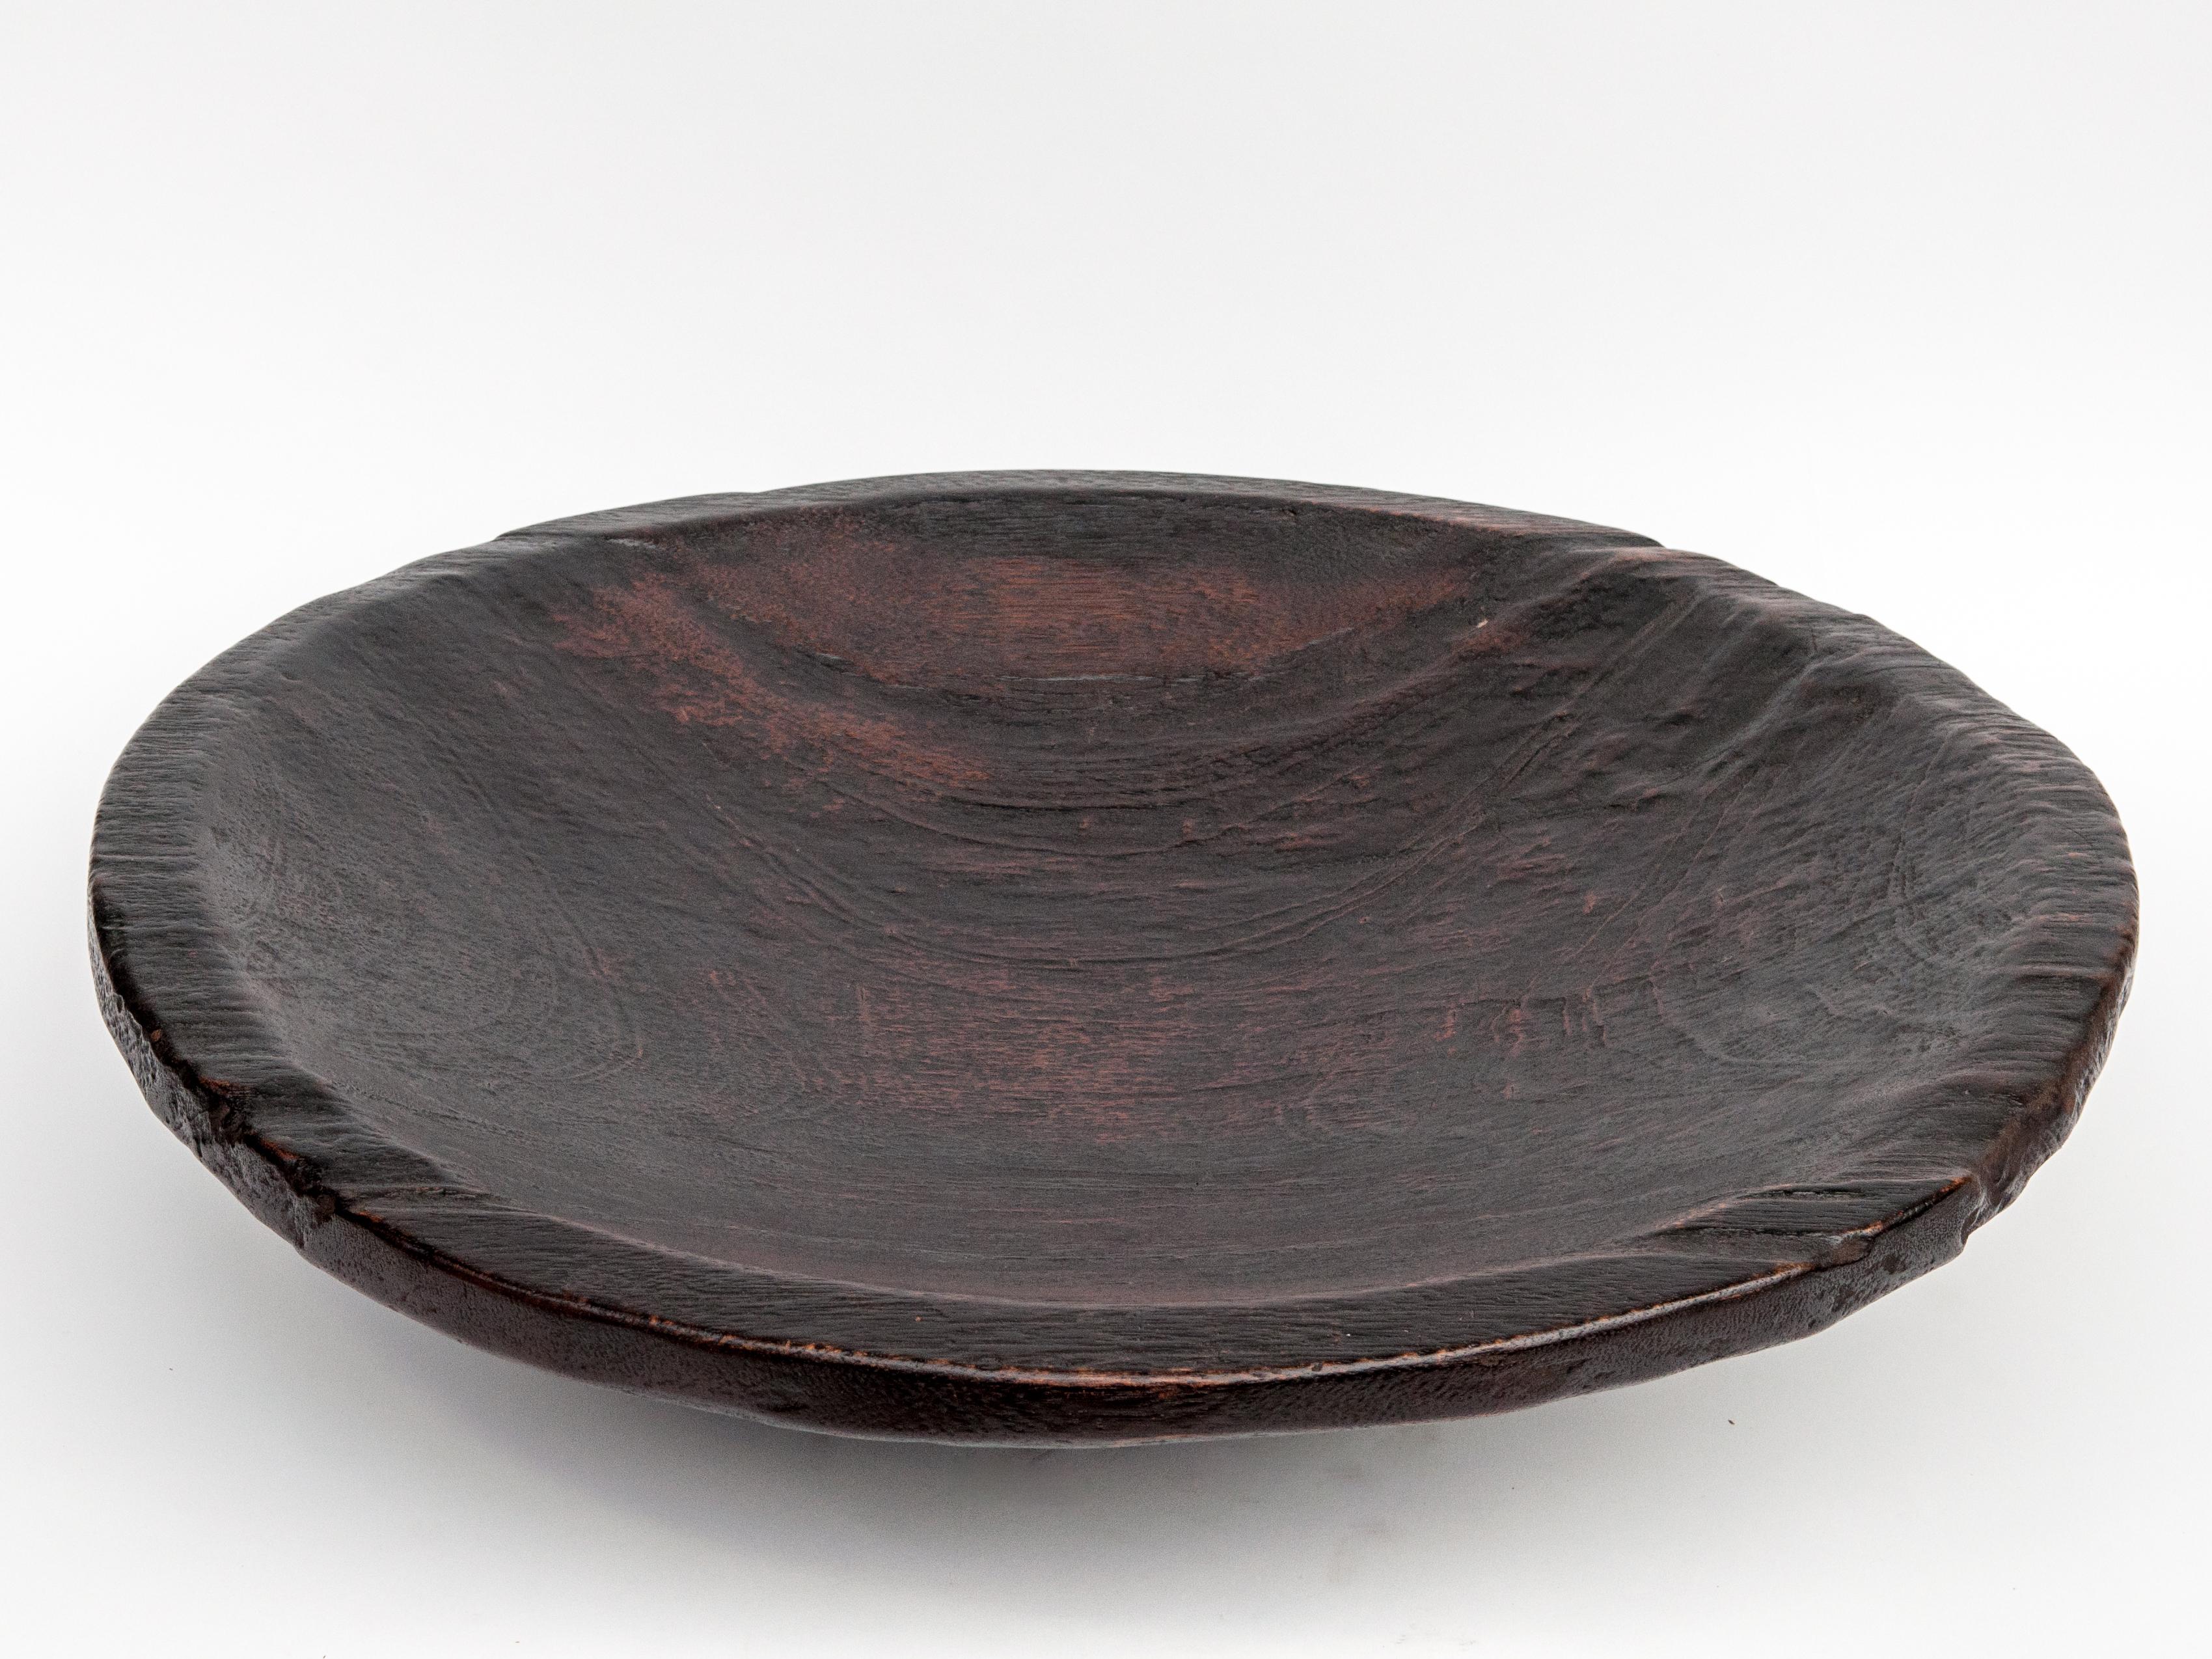 Large vintage wood bowl, Sumatra, jackfruit wood, stained, mid-late 20th century
This bowl was fashioned by hand from a single piece of jackfruit wood, and was used to as an impressive presentation piece to serve food and fruit in feasts and